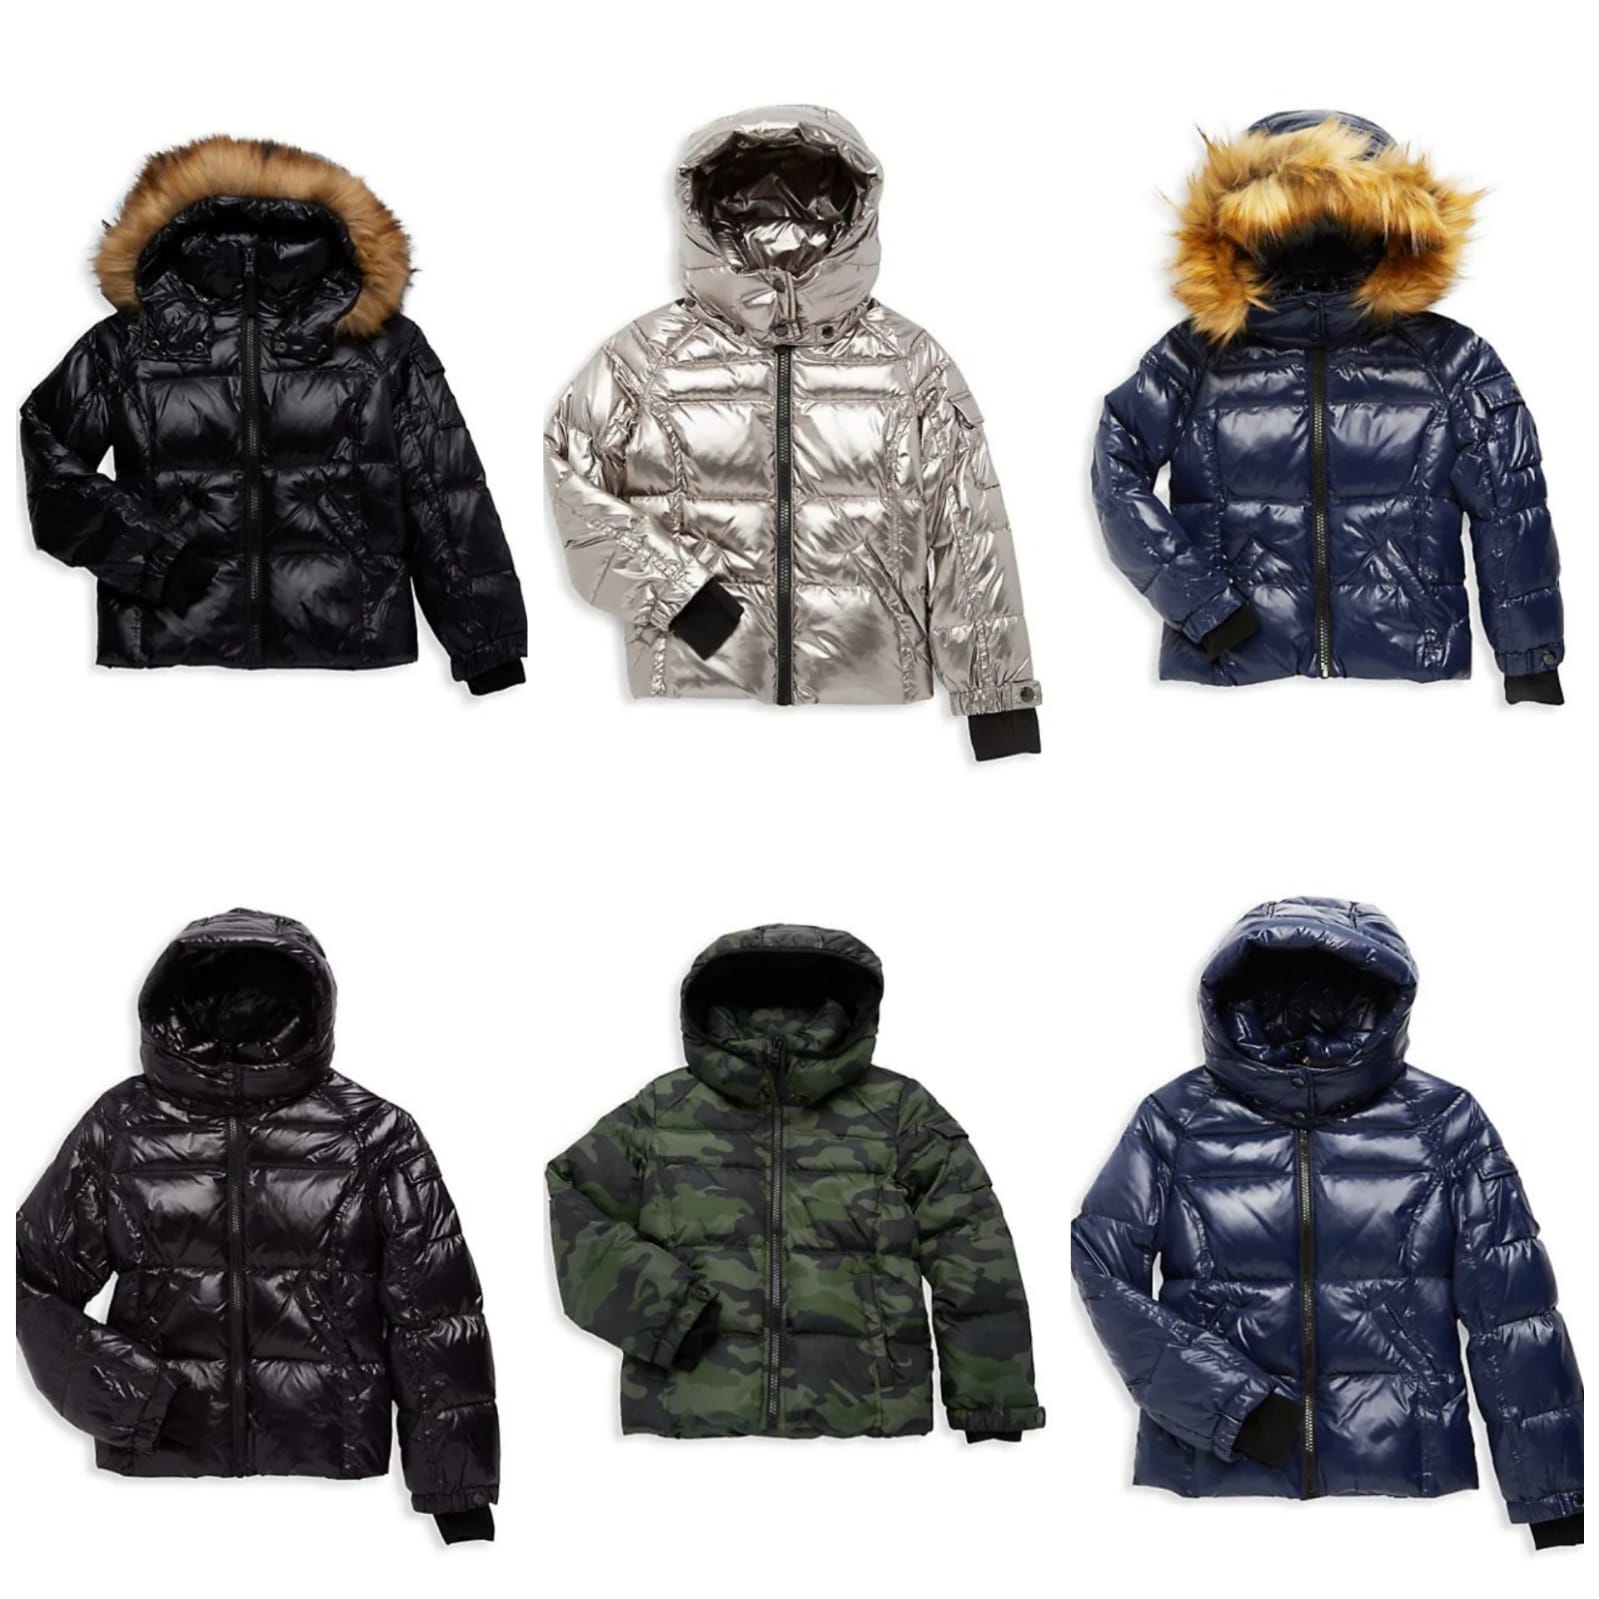 Sale on S13 Girl's / Boy's Hooded Puffer Jacket (More Available)